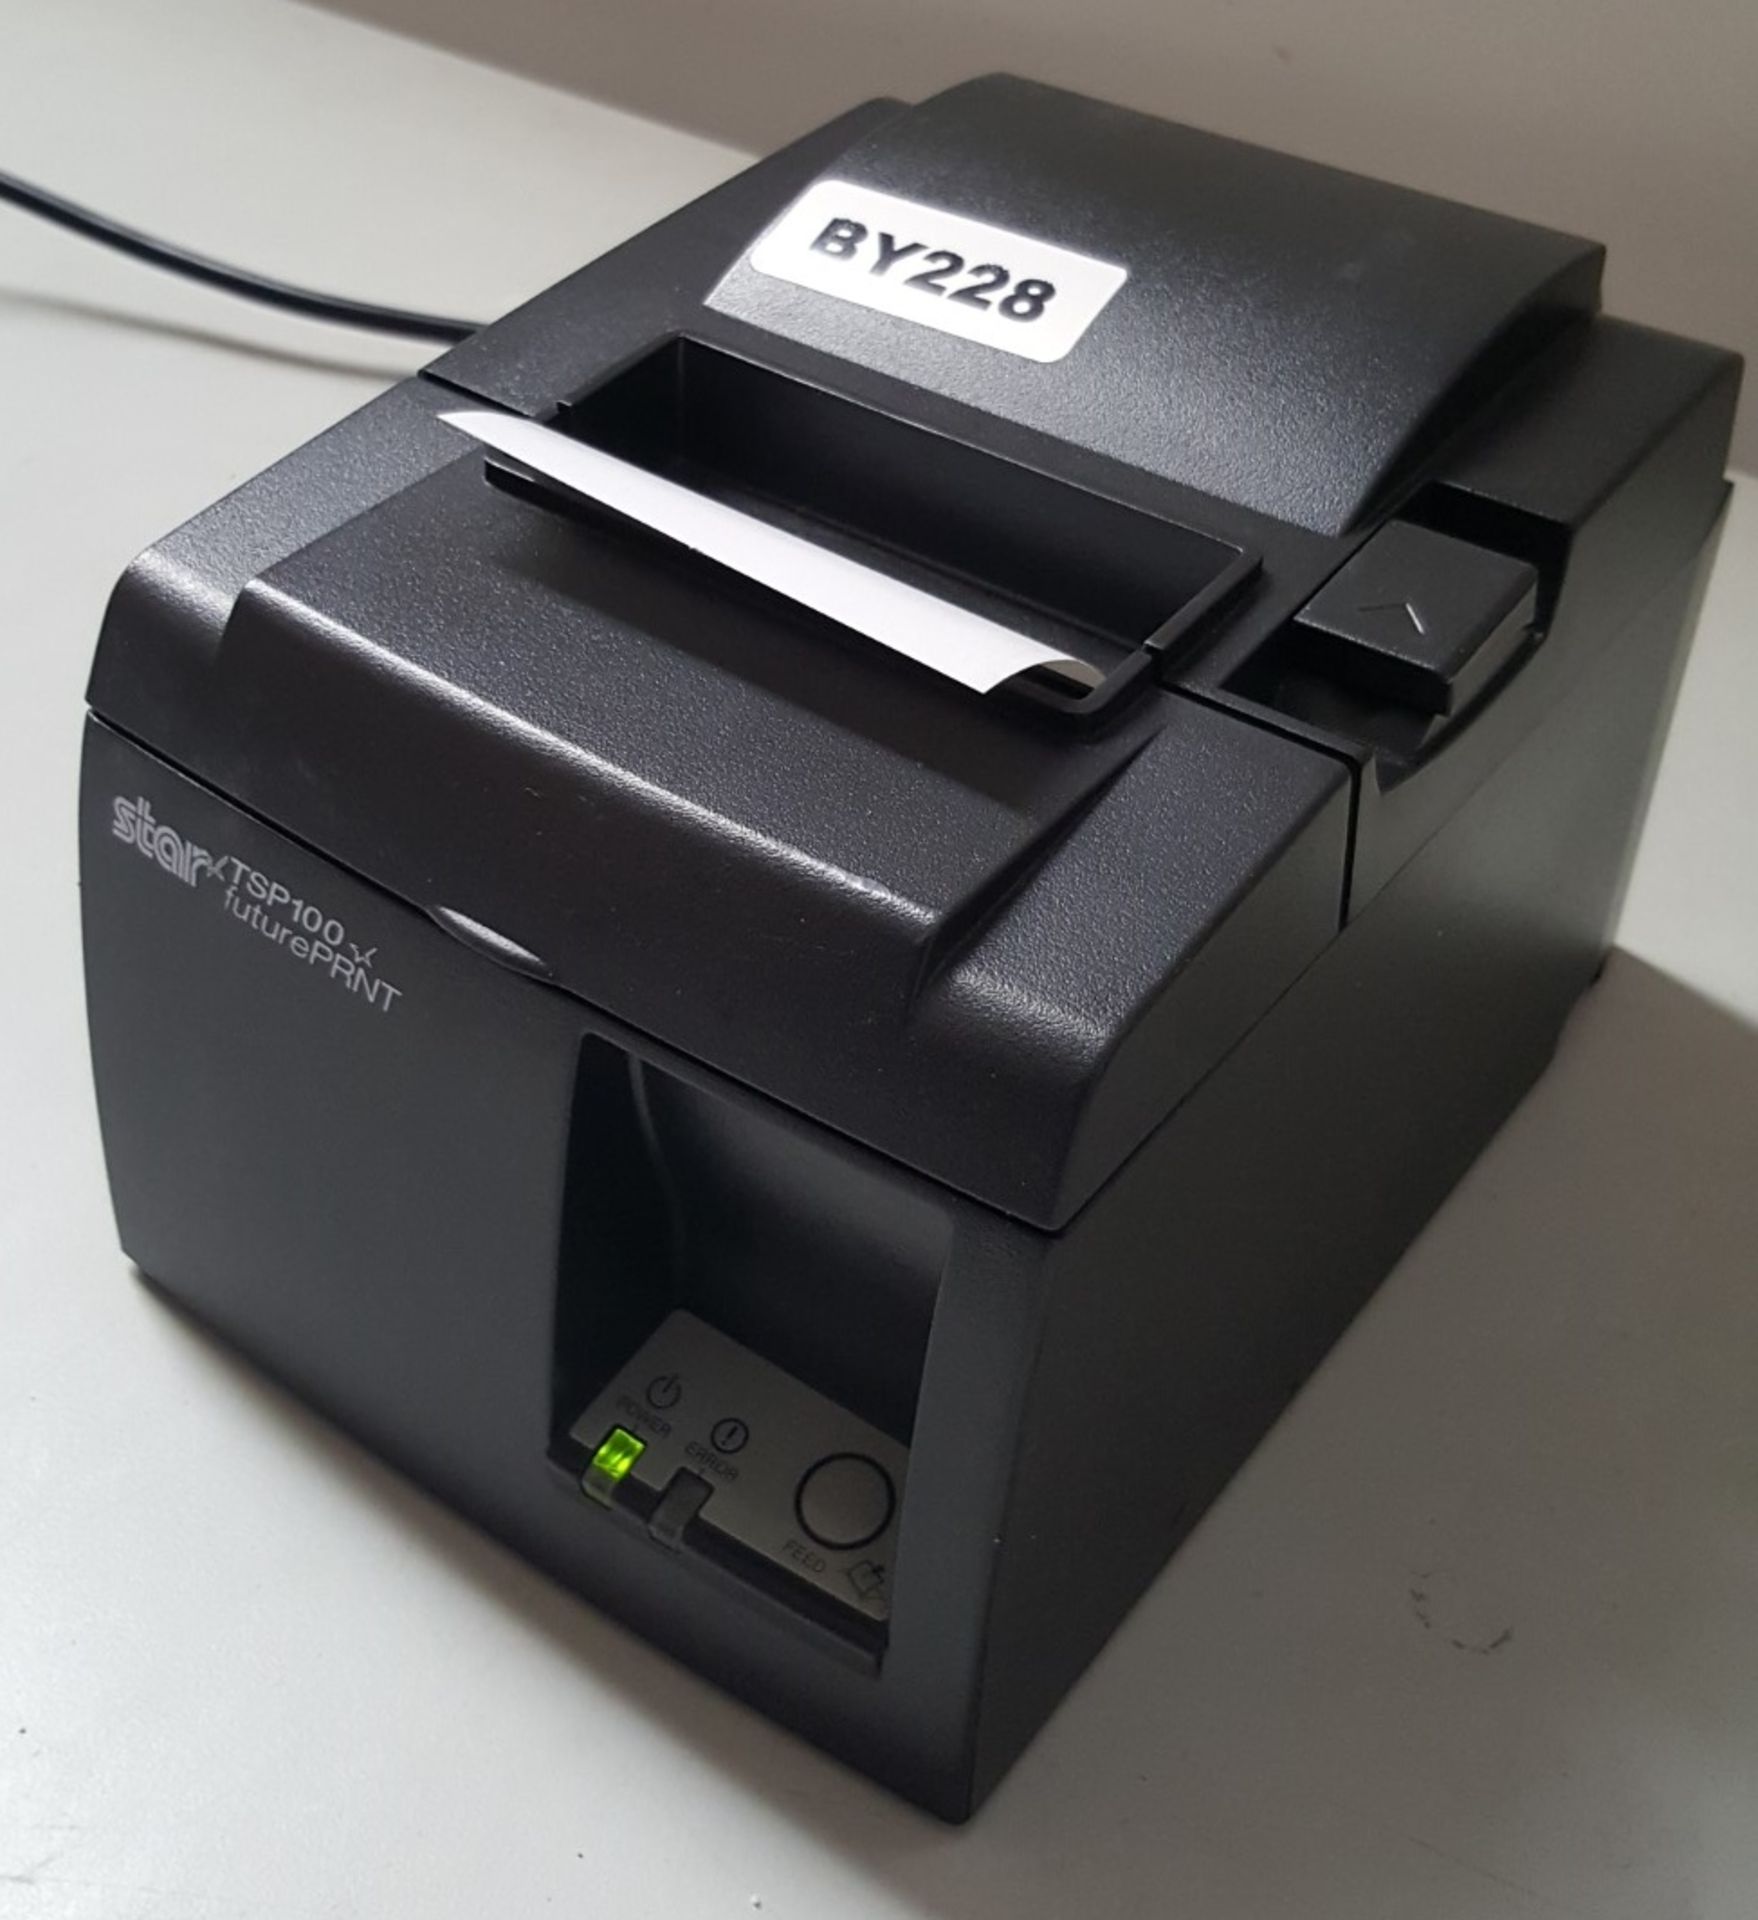 1 x Star Micronics TSP100 Thermal Receipt Printer - Ref BY228 - Image 2 of 5